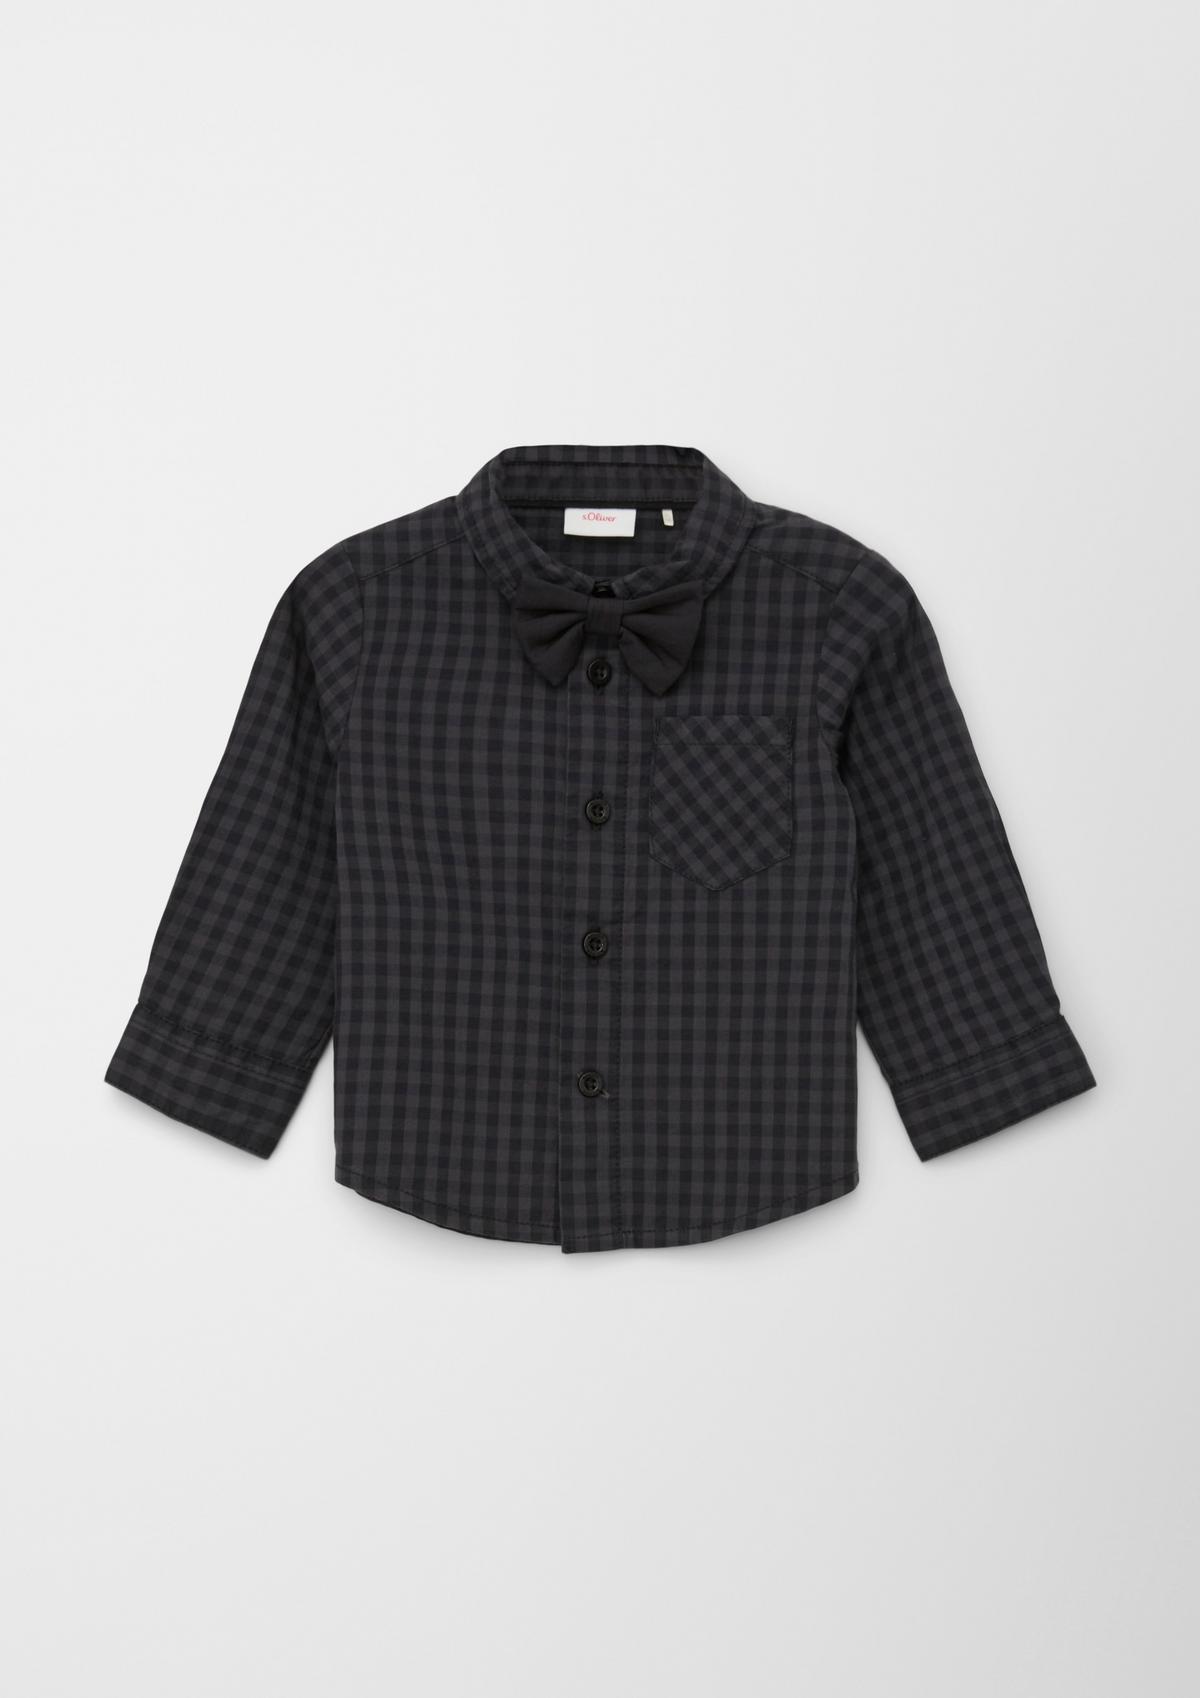 s.Oliver Long sleeve shirt with a detachable bow tie